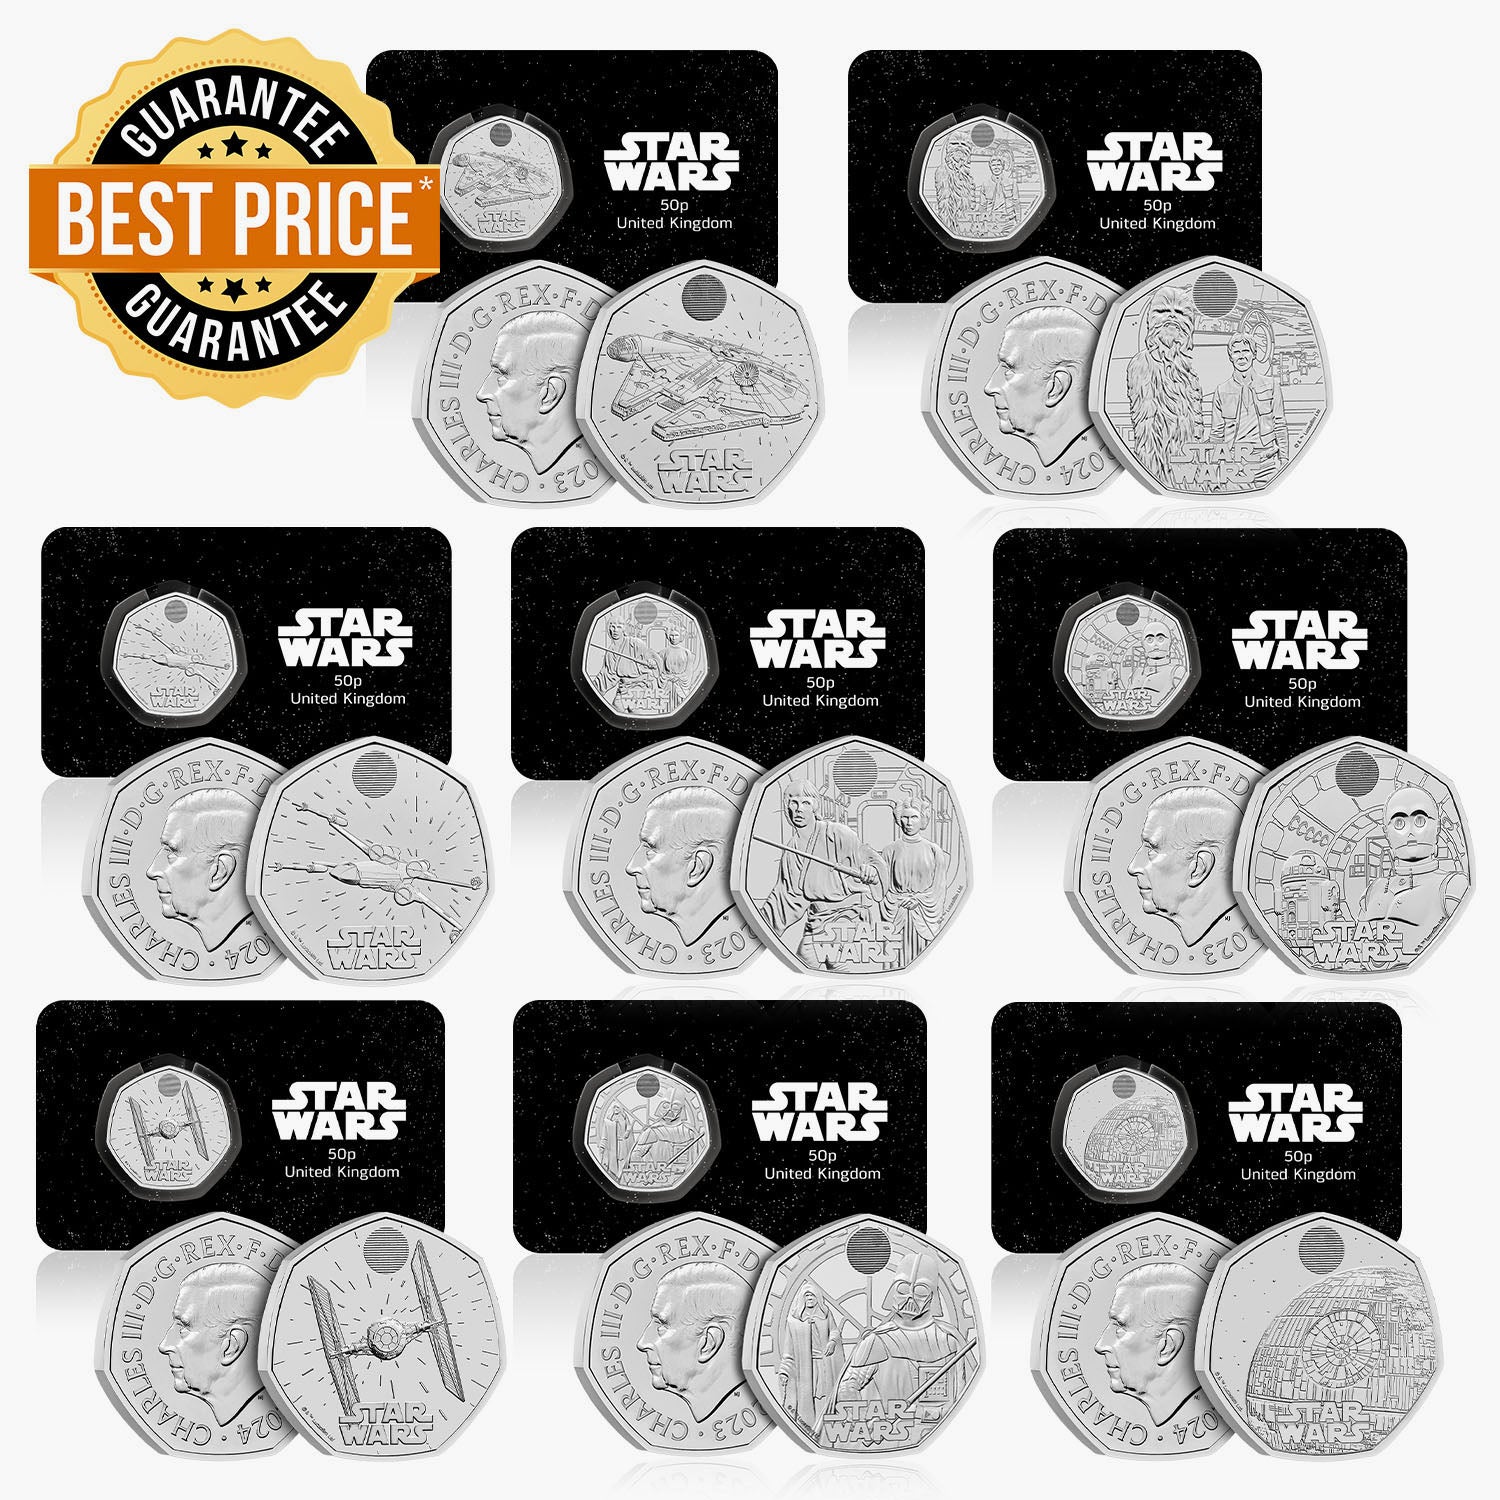 Star Wars Duos & Vehicles Complete UK 50p Coin Set